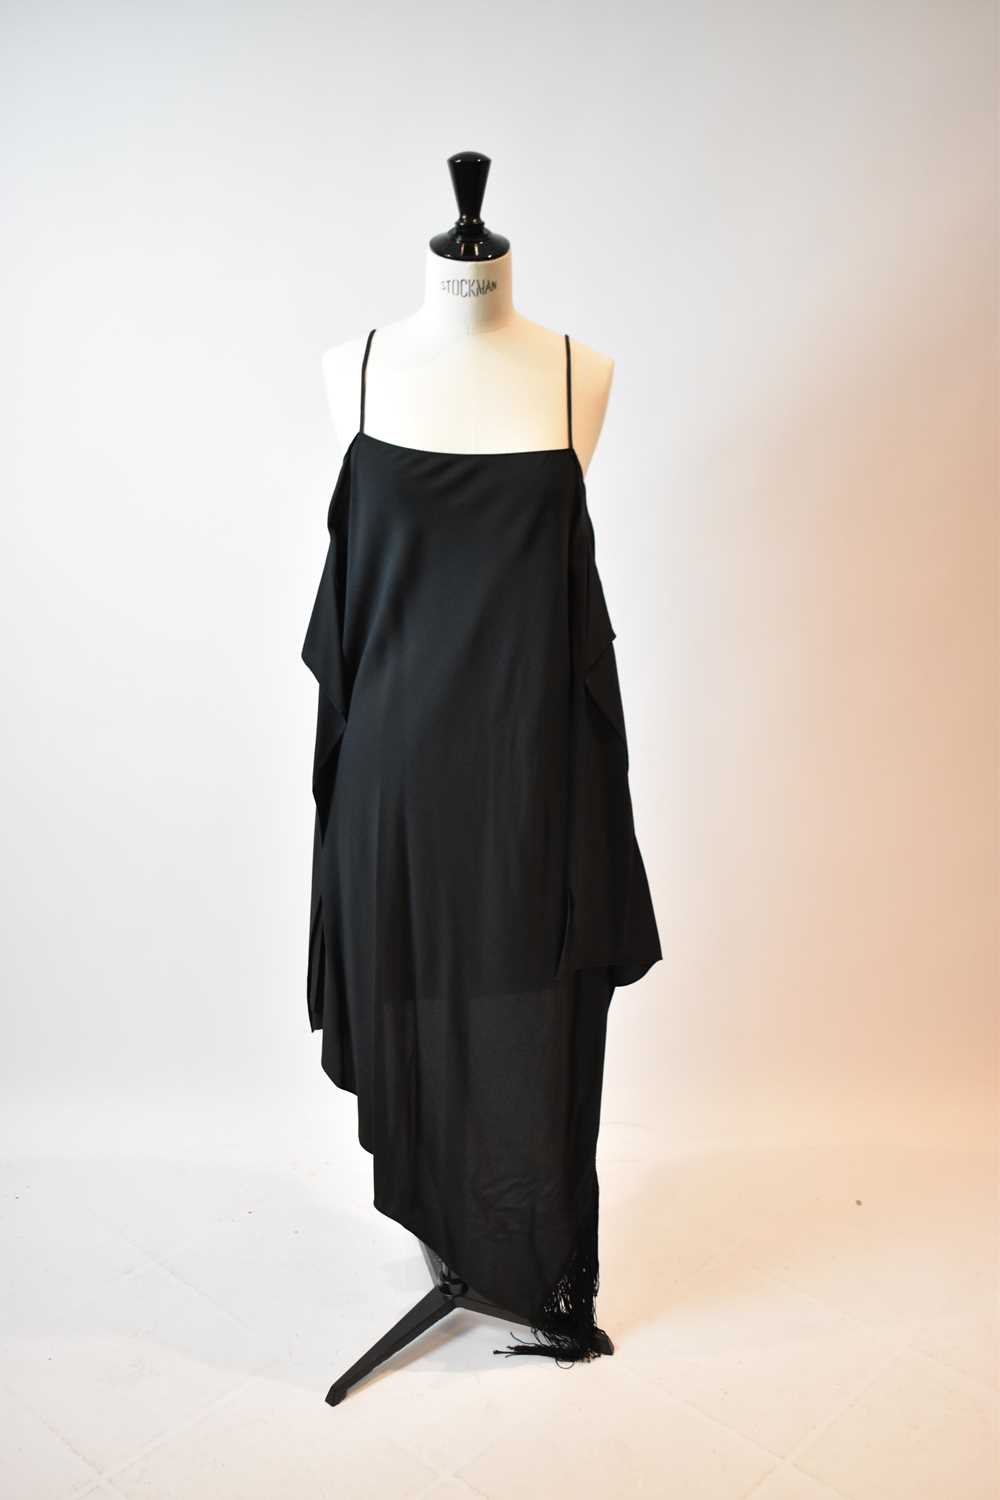 BALENCIAGA; a black wool A-symmetrical dress with spaghetti straps and matching cape, both with - Image 2 of 4